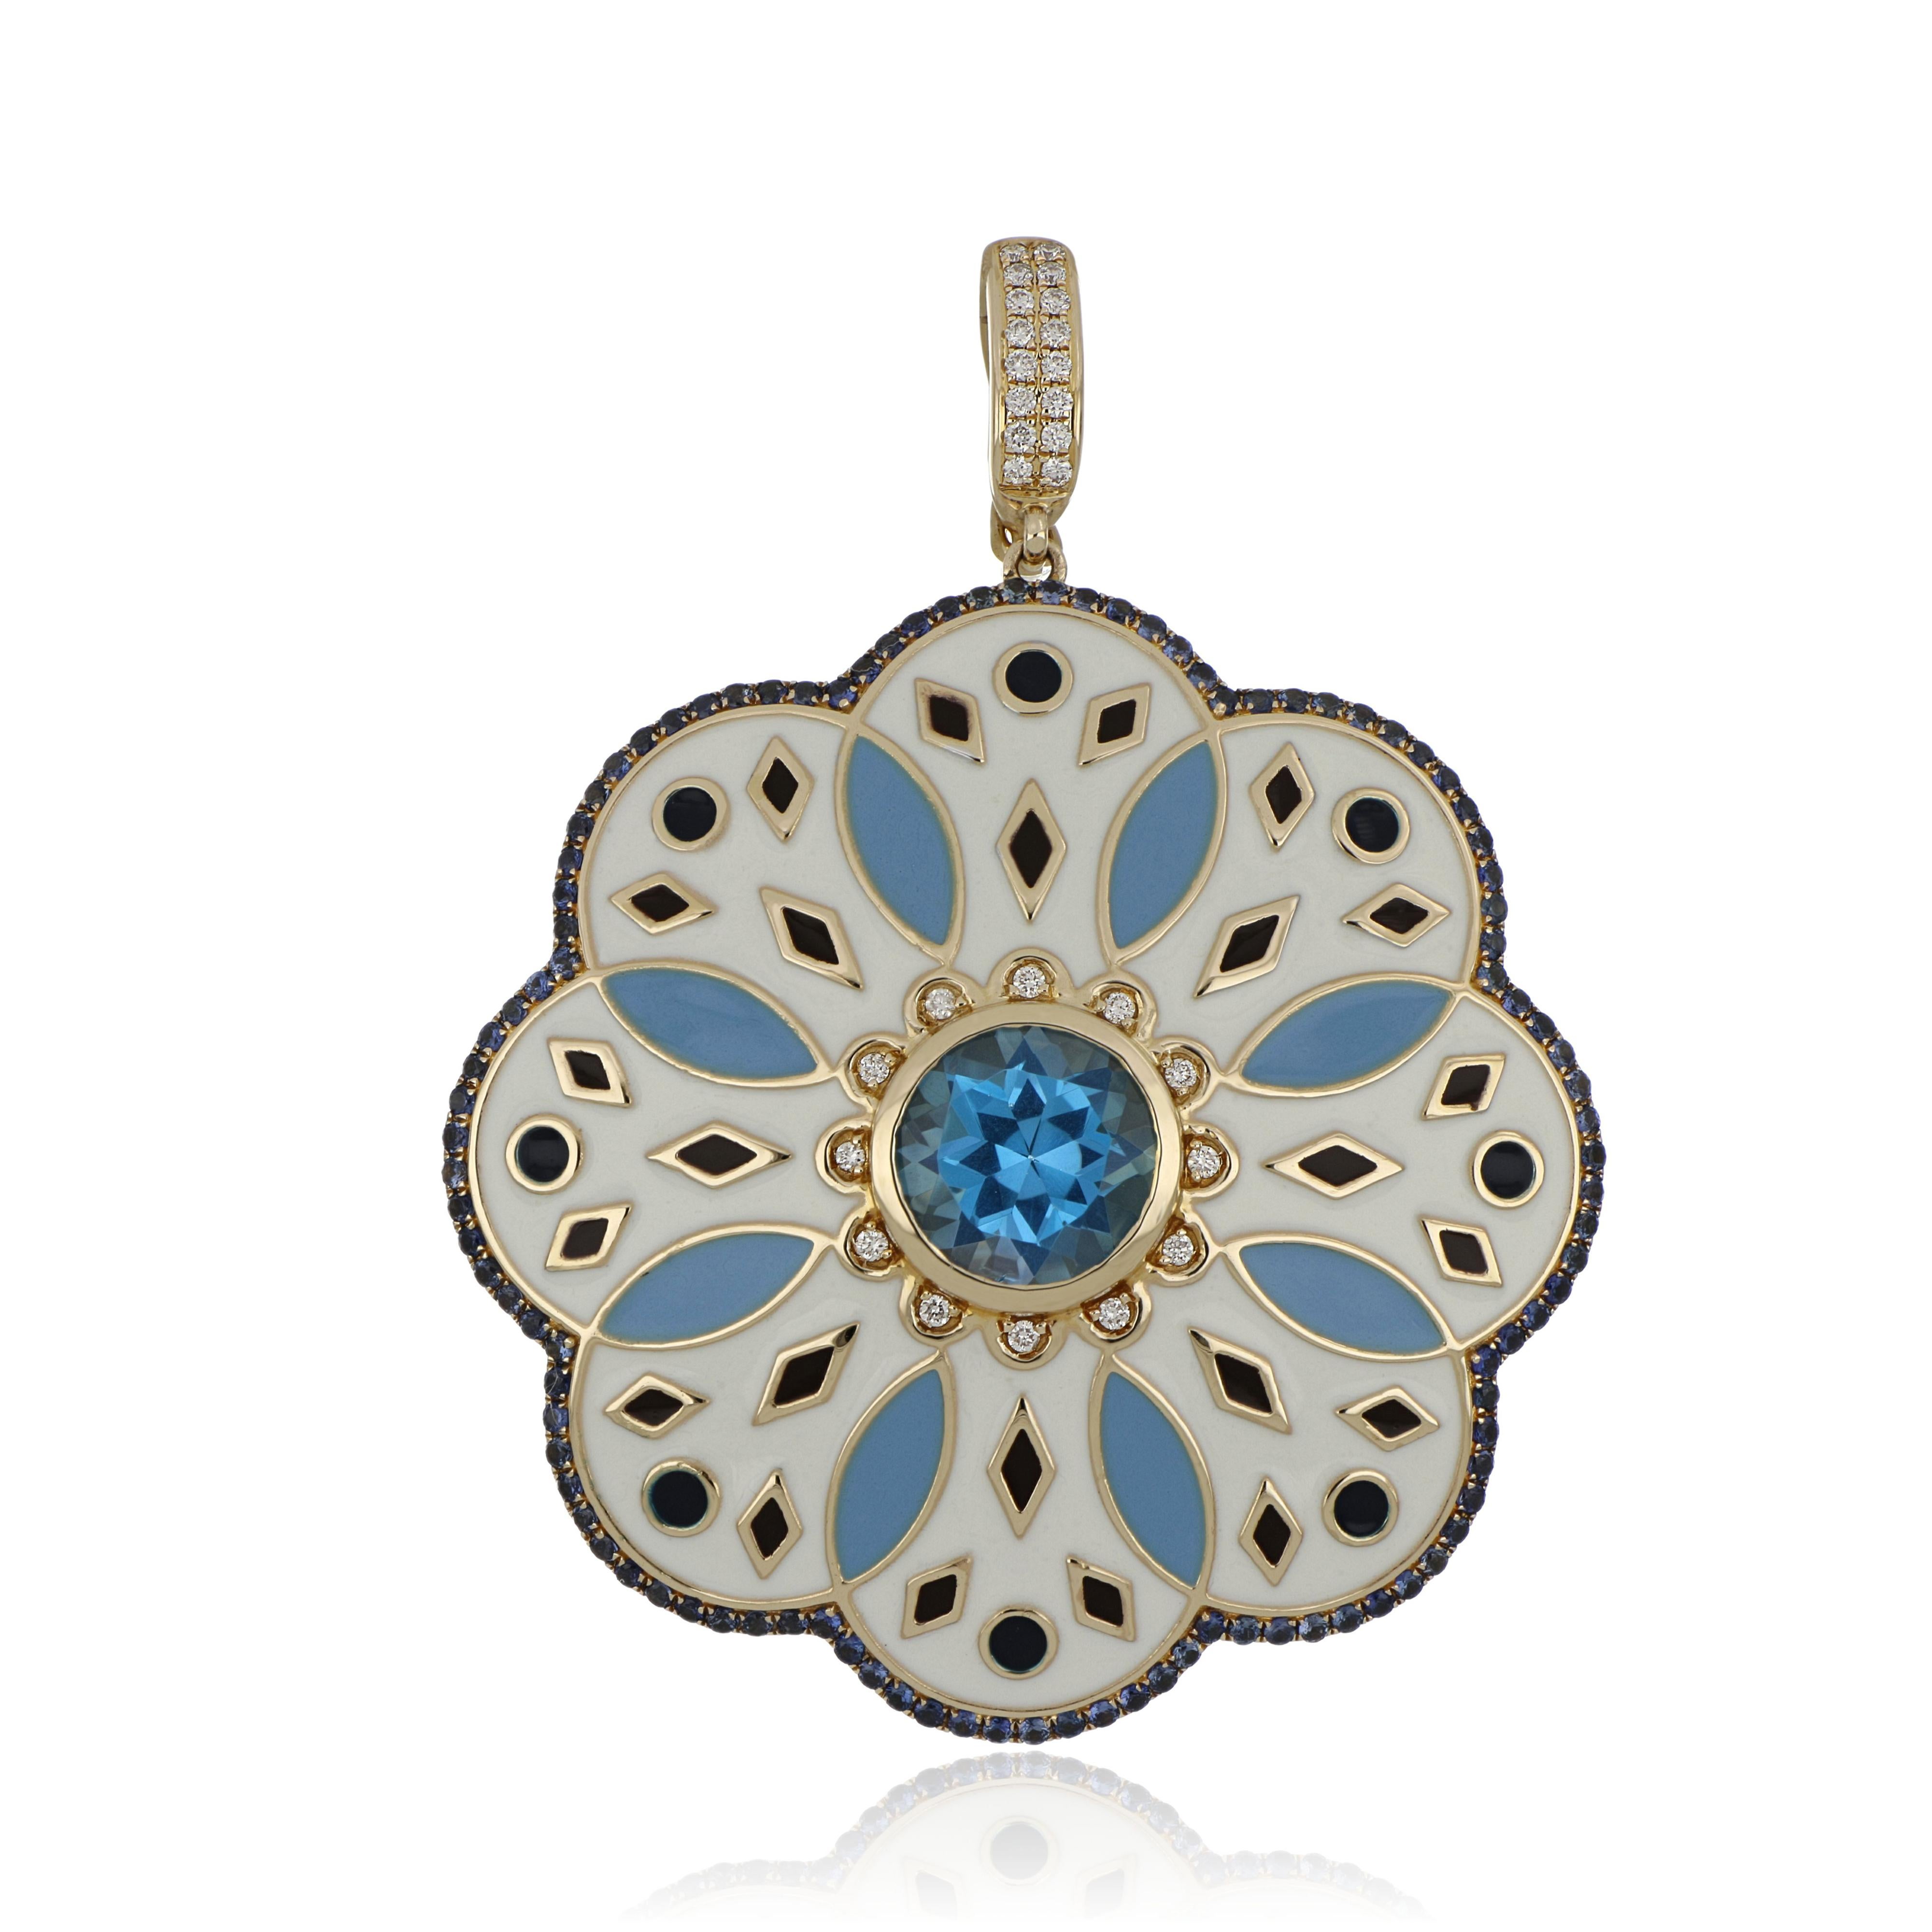 Elegant and exquisite Enamel Cocktail 14 K Pendant, center set with 2.42 Cts. Round Cut Swiss Blue Topaz, accented with Diamonds, weighing approx. 0.09 Cts and Surrounded with 0.56 Cts of Blue Sapphire Beautifully Hand crafted in 14 Karat Yellow